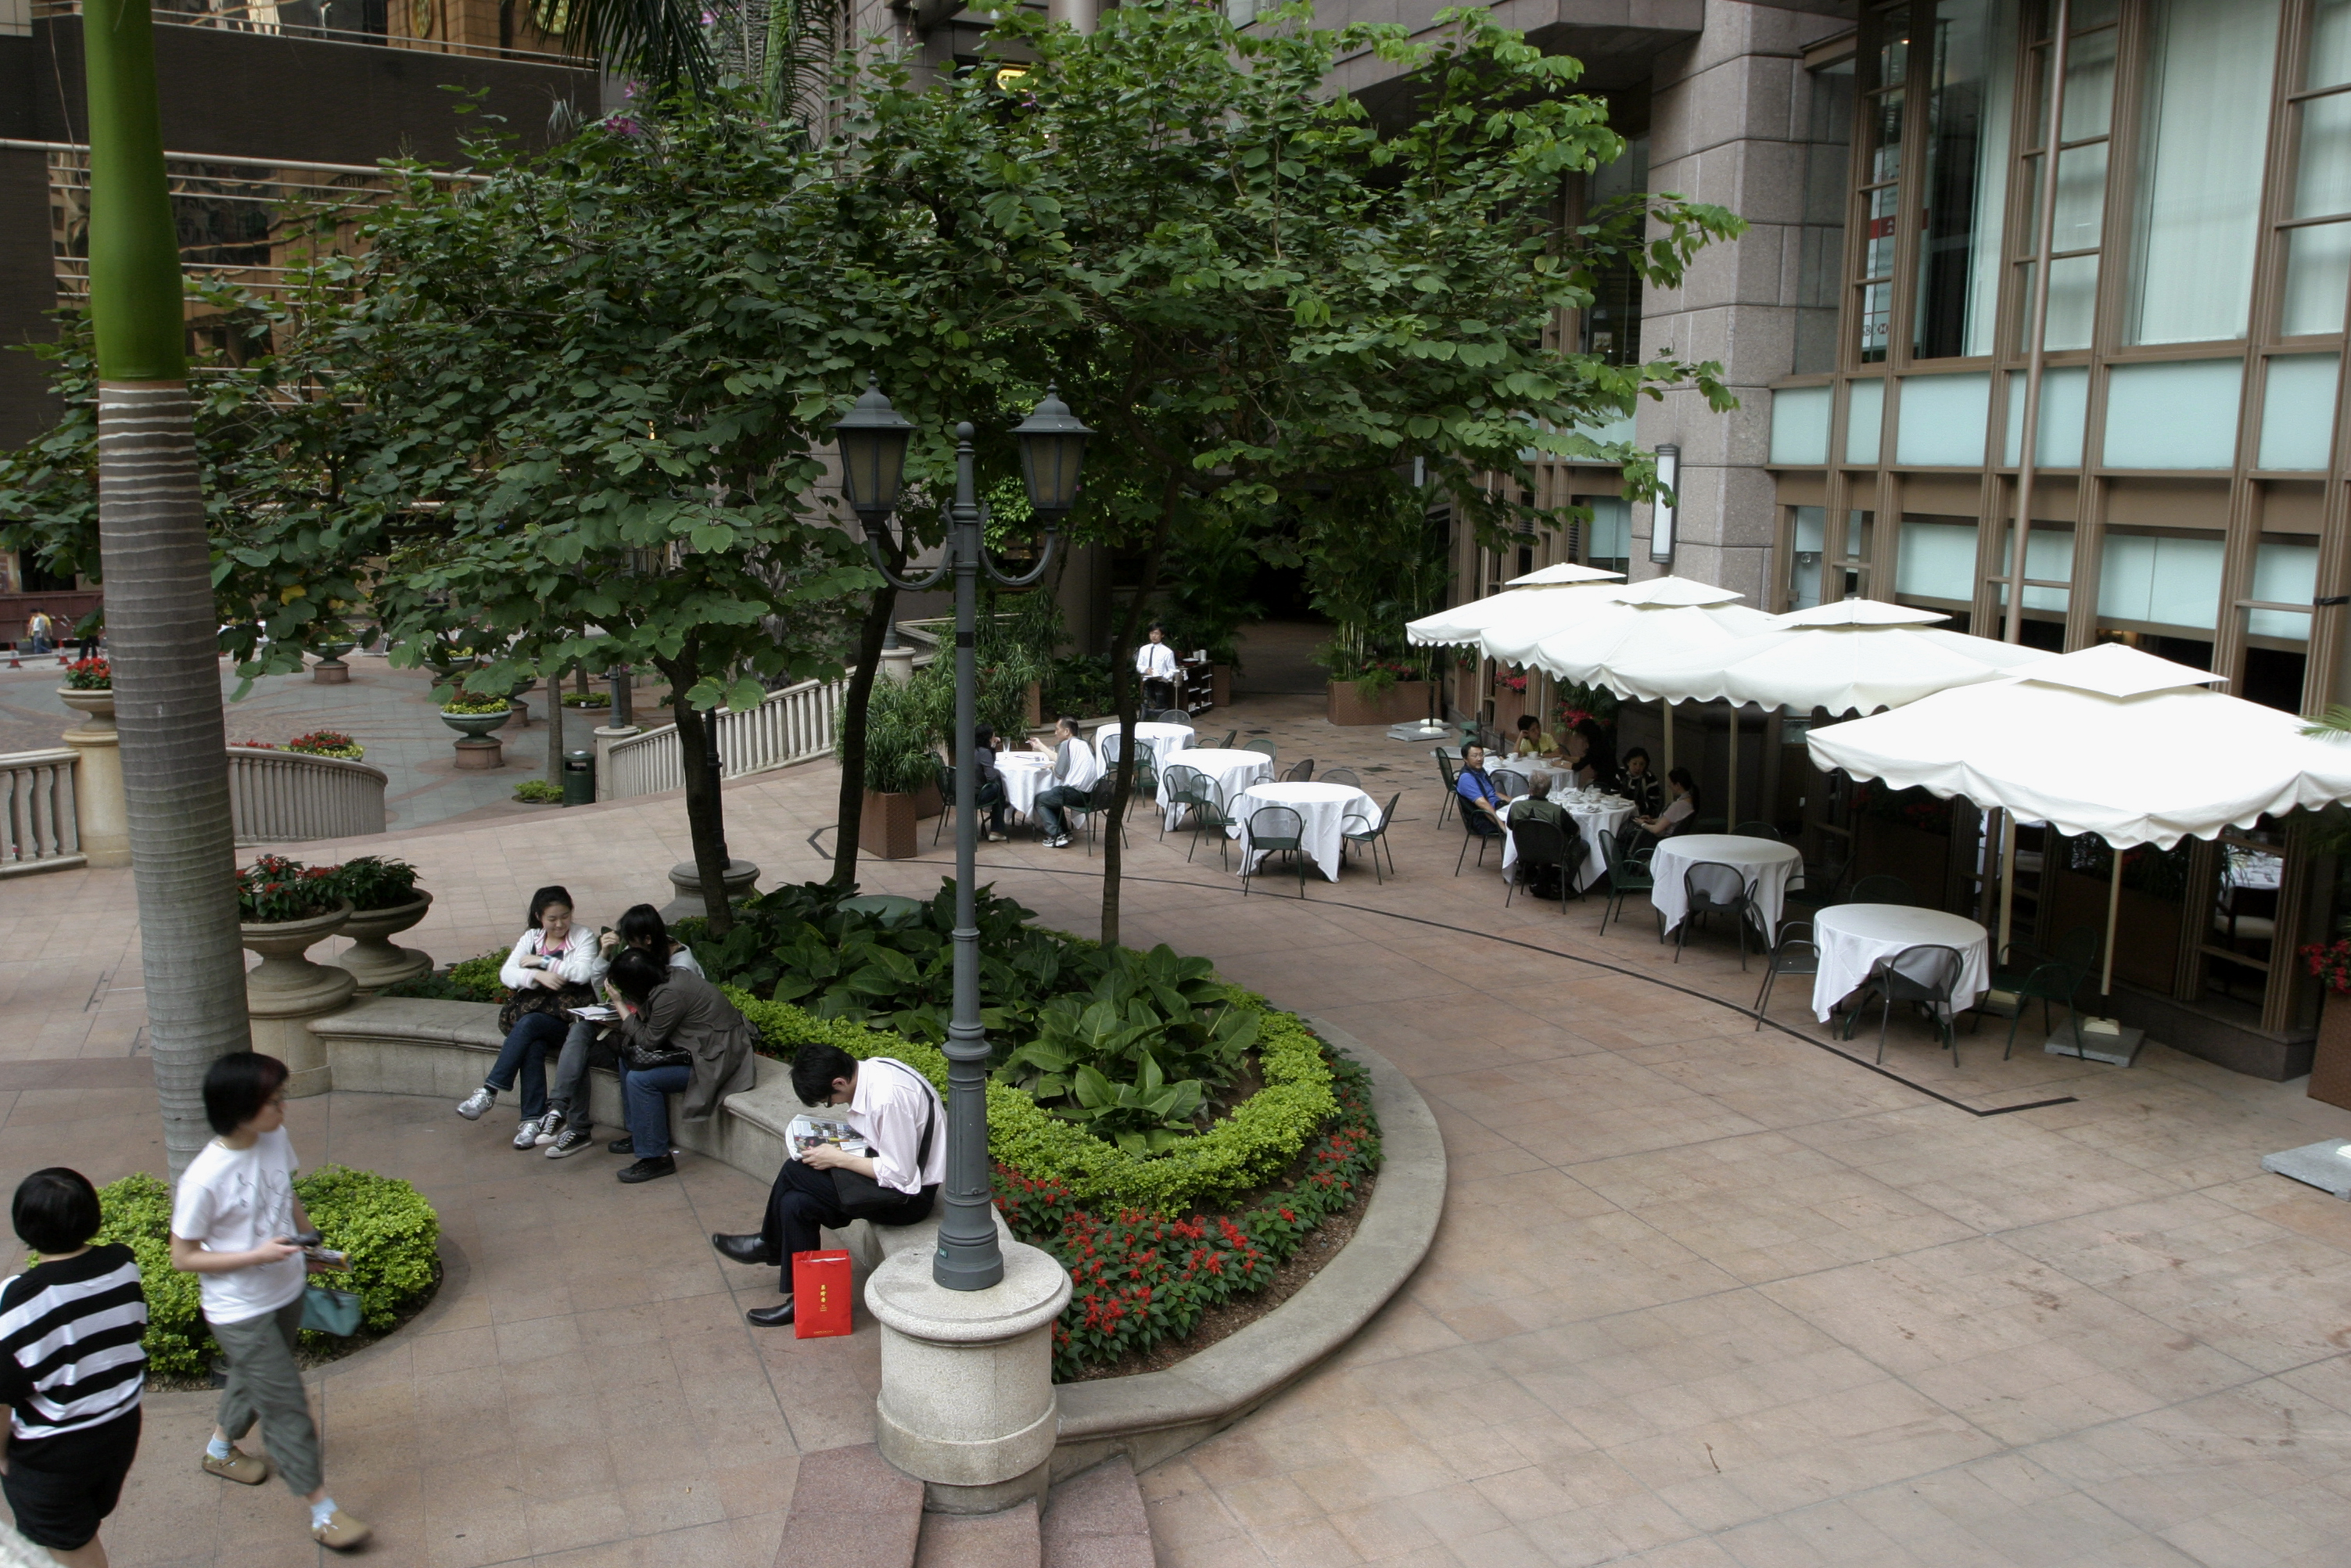 Public area at various residential and commercial development in Hong Kong. 29MAR08. Picture shows an open space for public at Grand Millennium Plaza, Central.